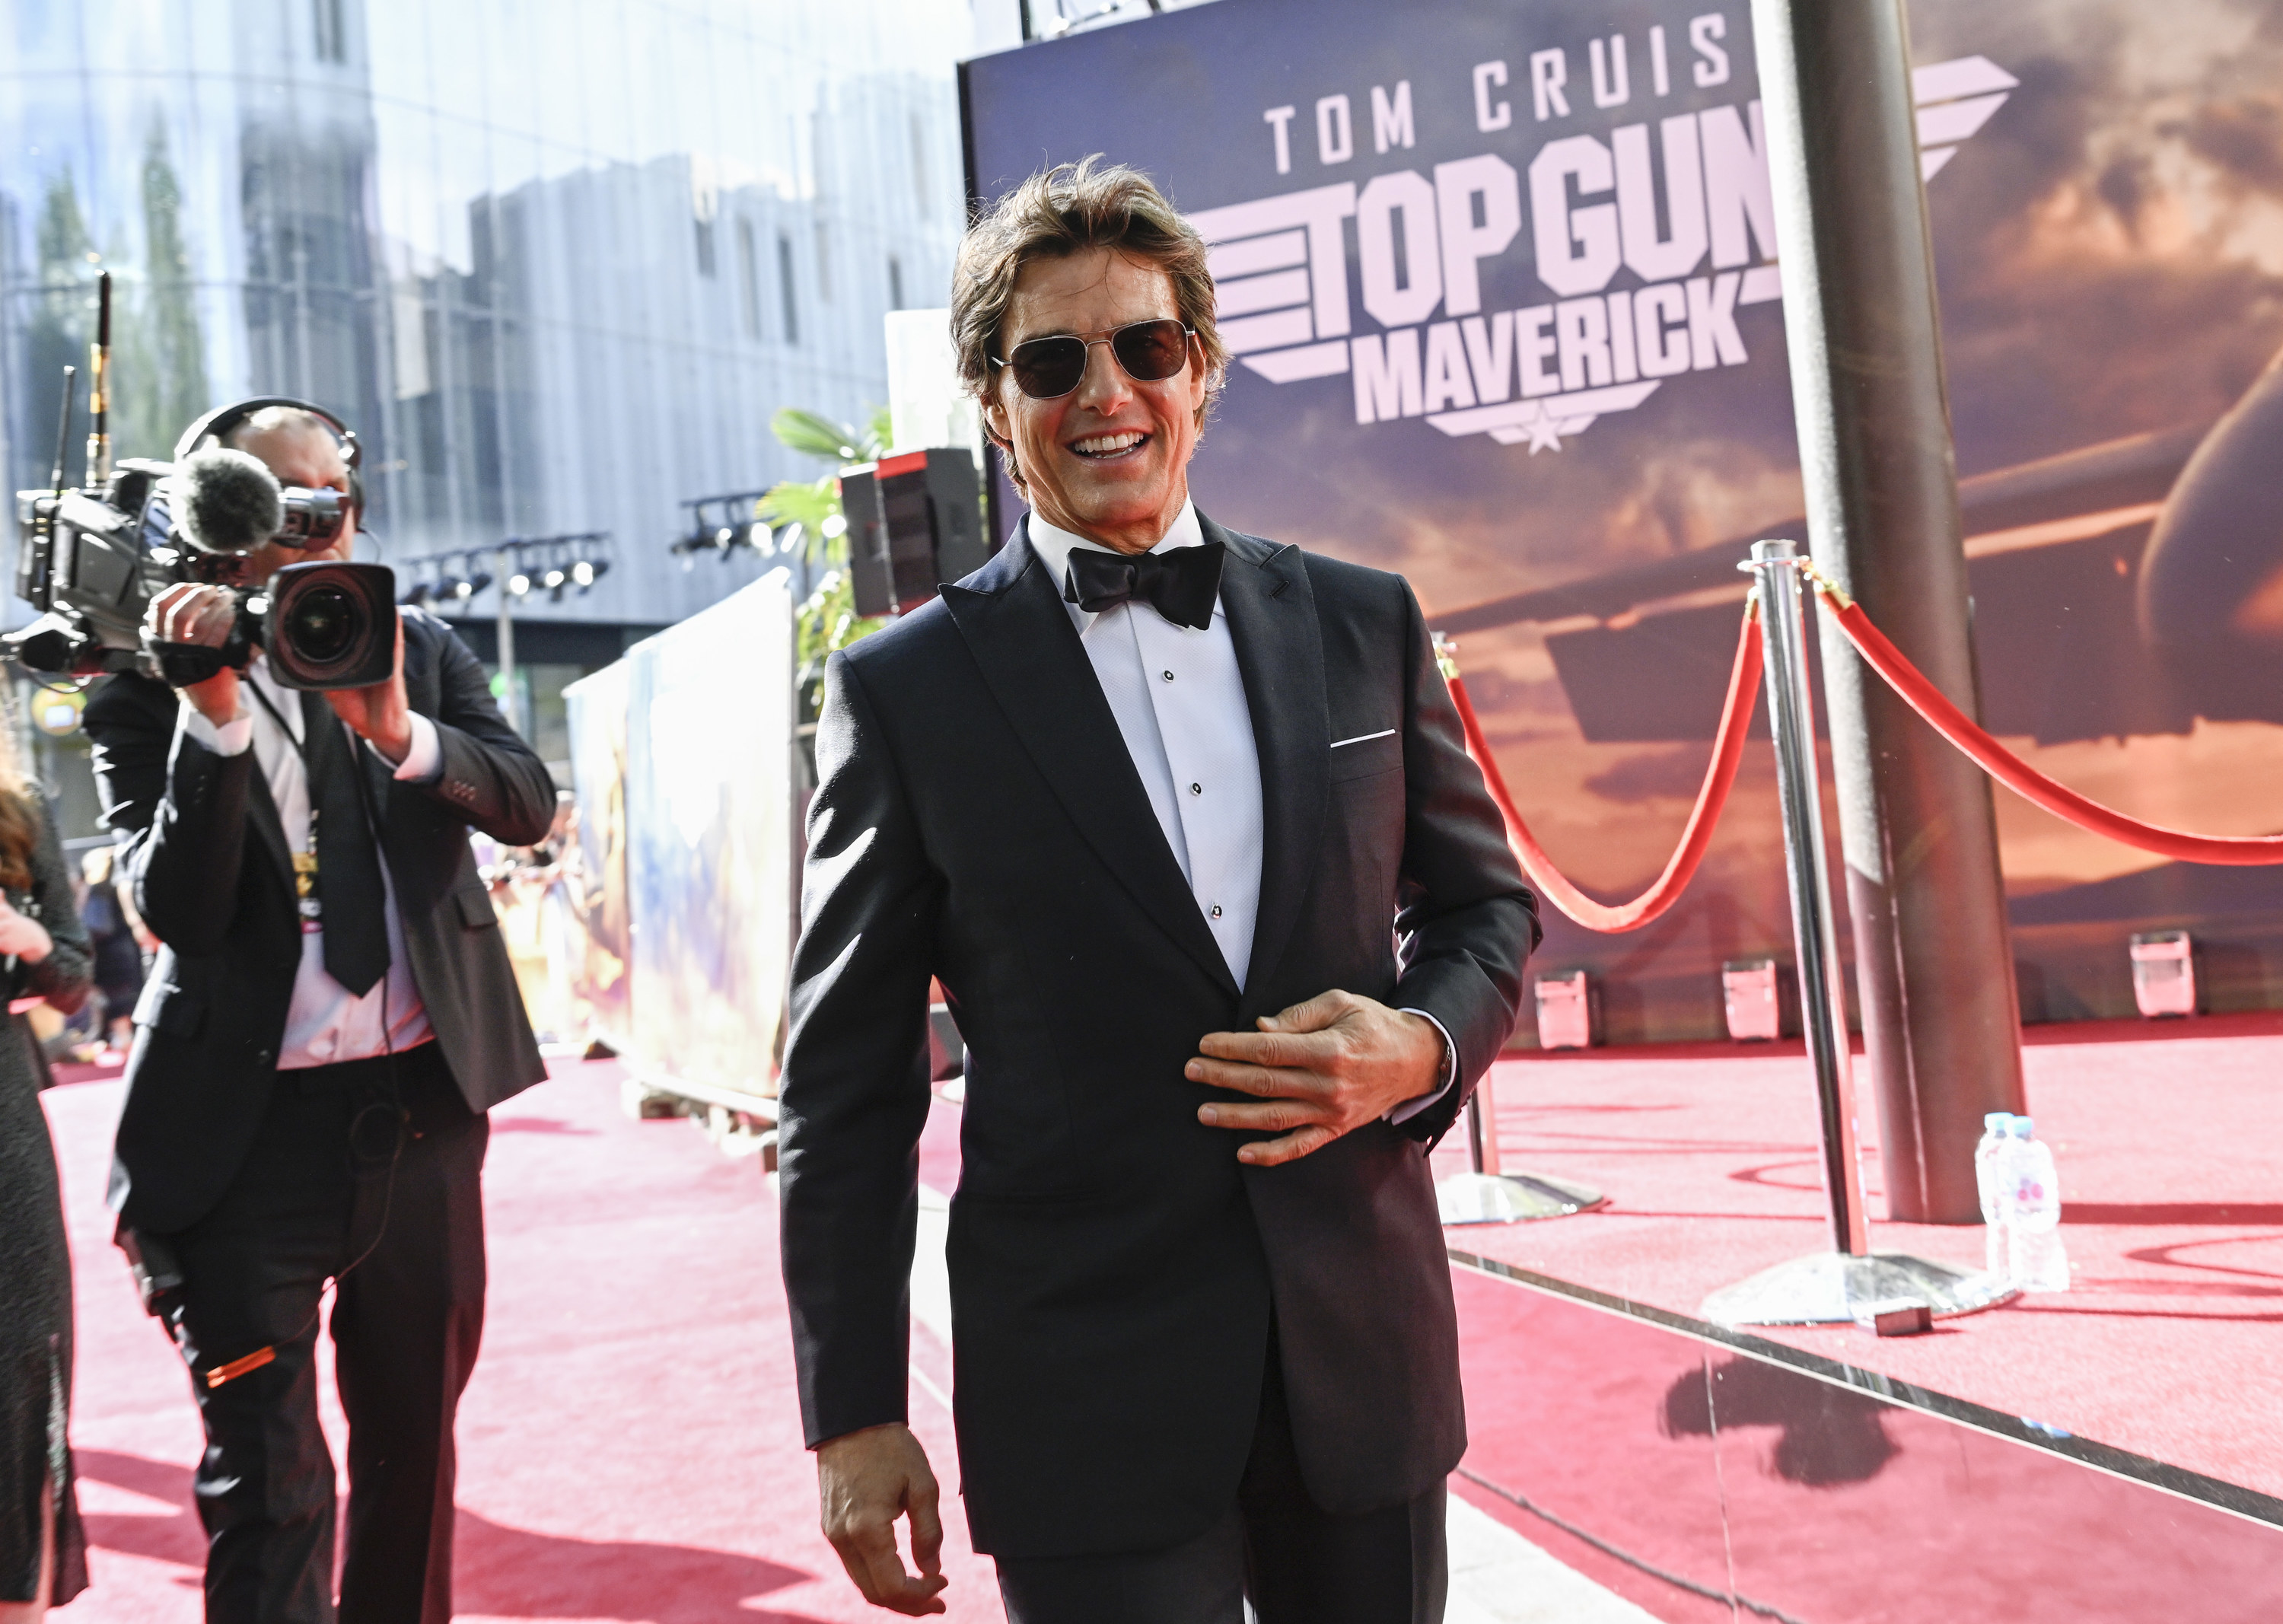 Tom Cruise at a red carpet event for Top Gun: Maverick